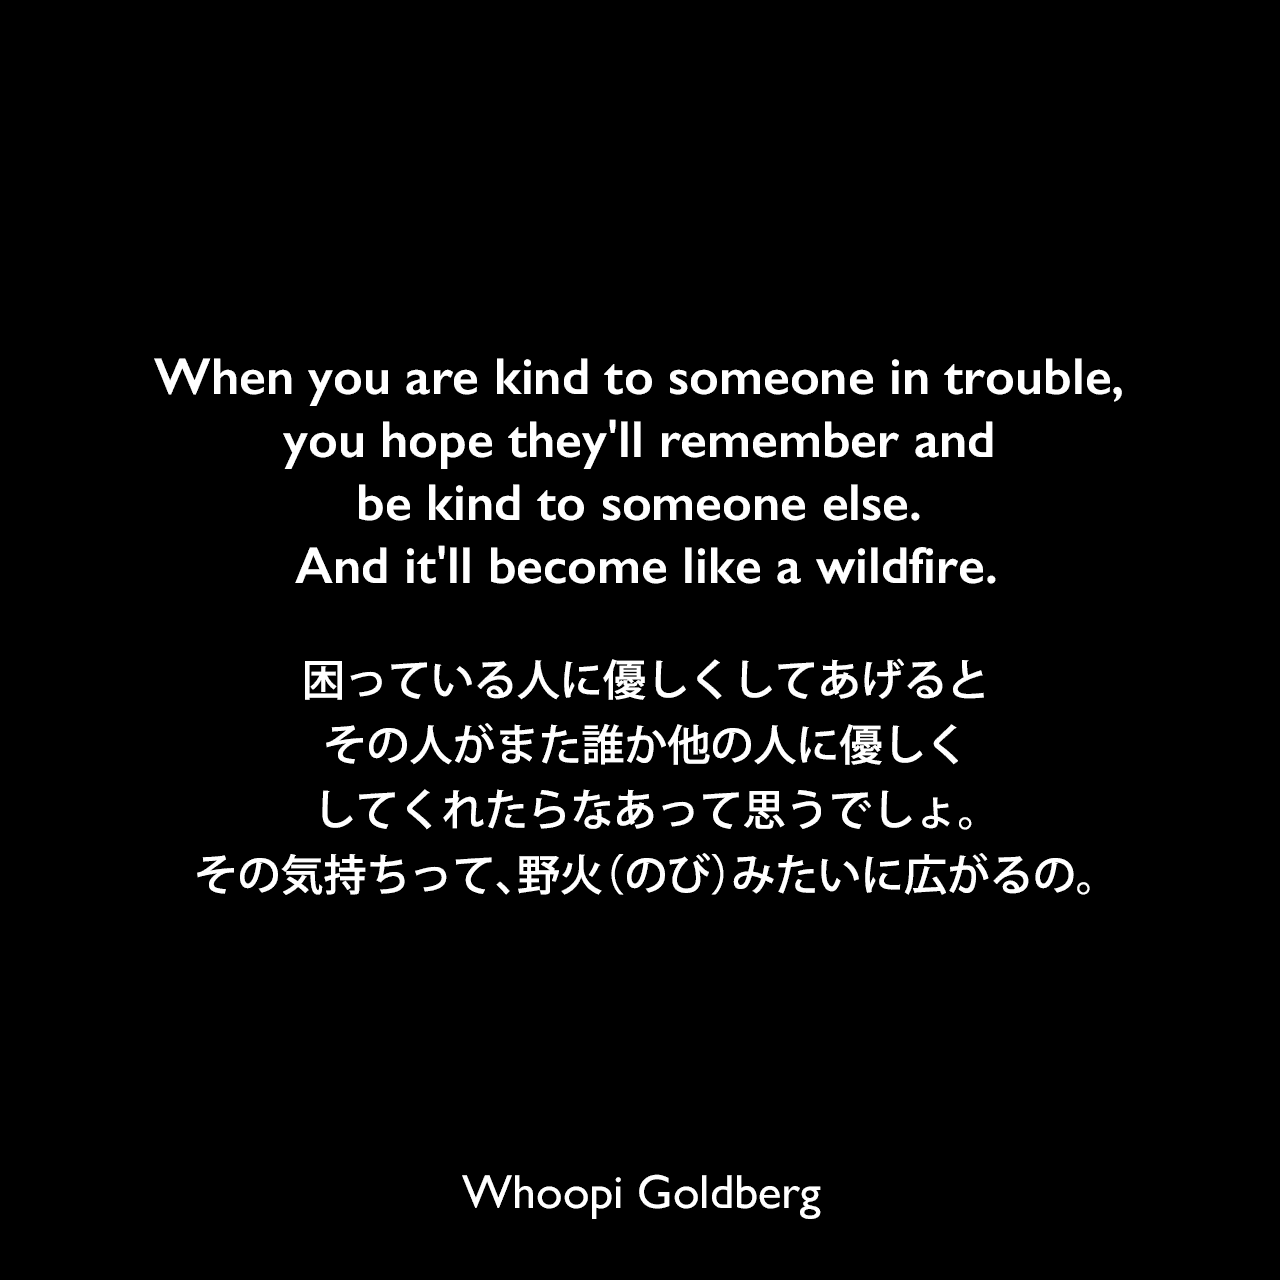 When you are kind to someone in trouble, you hope they'll remember and be kind to someone else. And it'll become like a wildfire.困っている人に優しくしてあげると、その人がまた誰か他の人に優しくしてくれたらなあって思うでしょ。その気持ちって、野火（のび）みたいに広がるの。Whoopi Goldberg